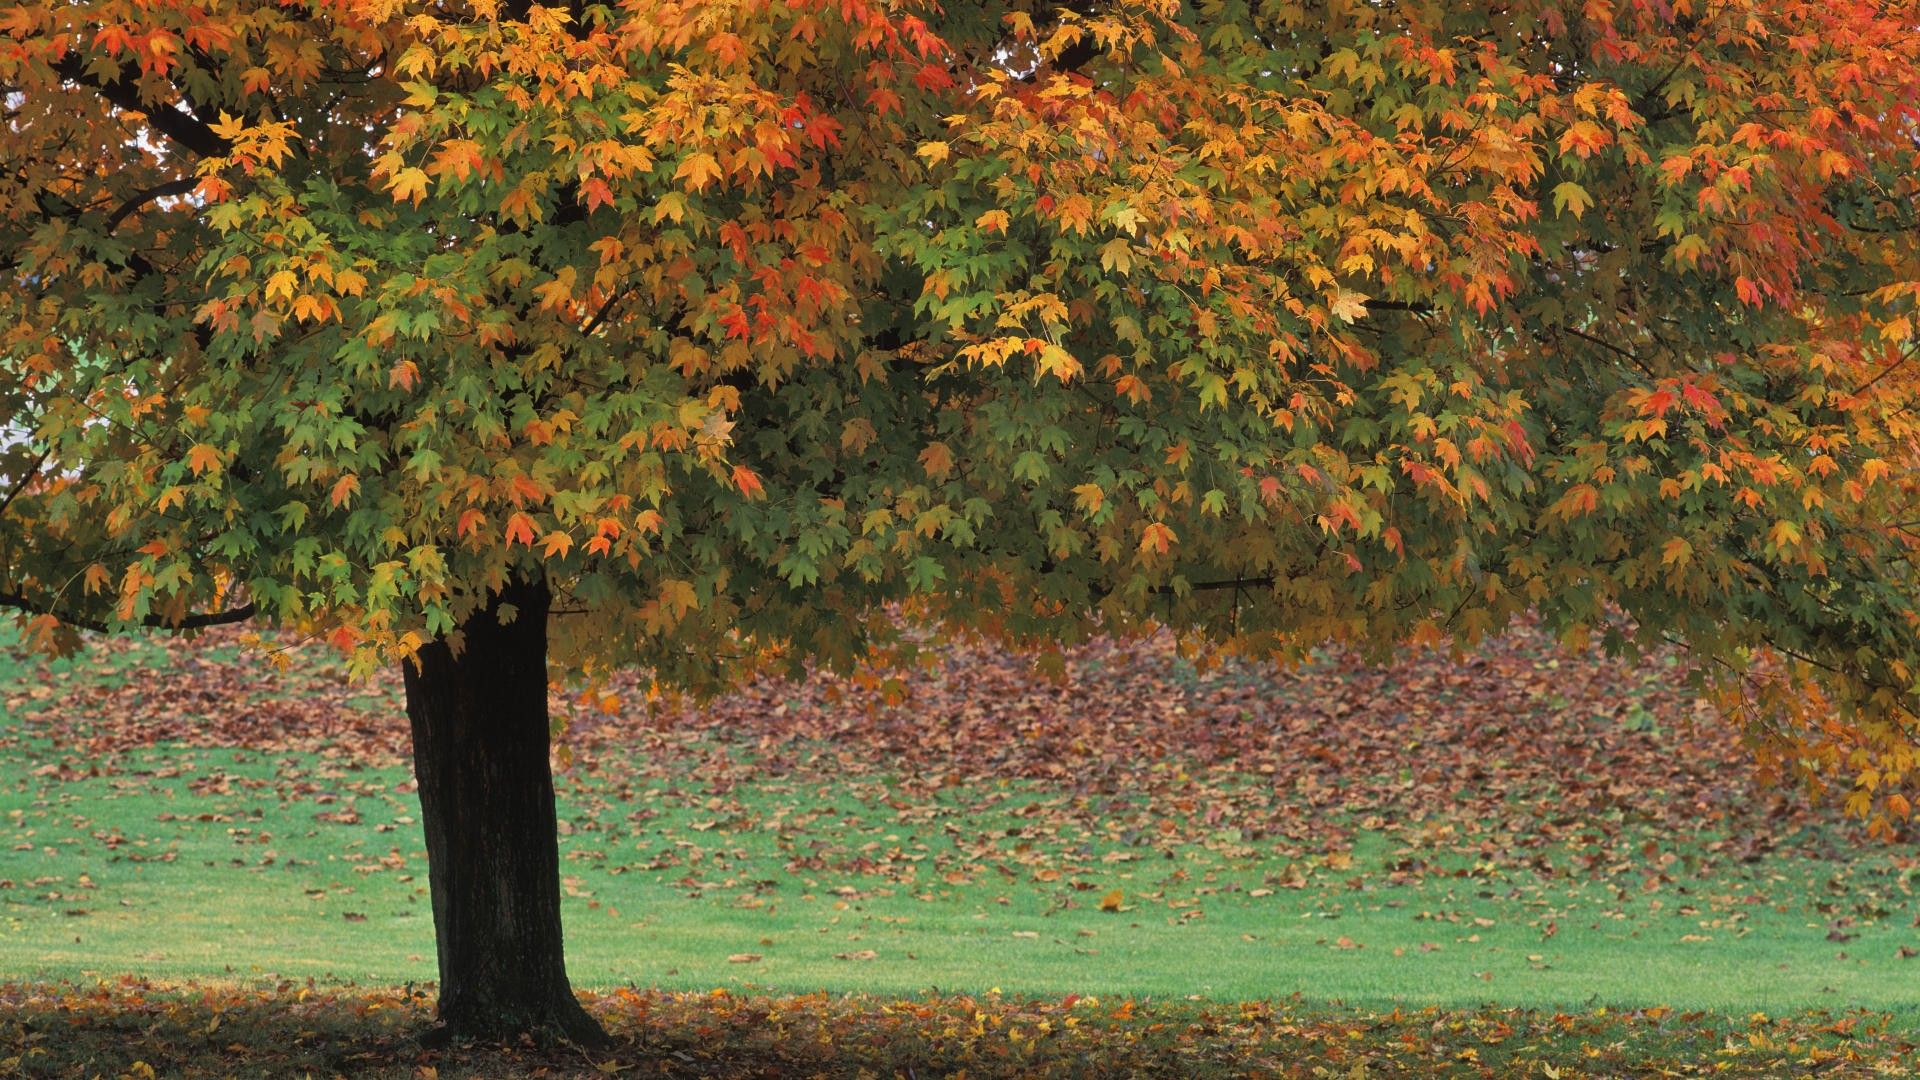 Autumn, county, brown, state, park, wallpaper, indiana, tree, maple, single, landscape, nature